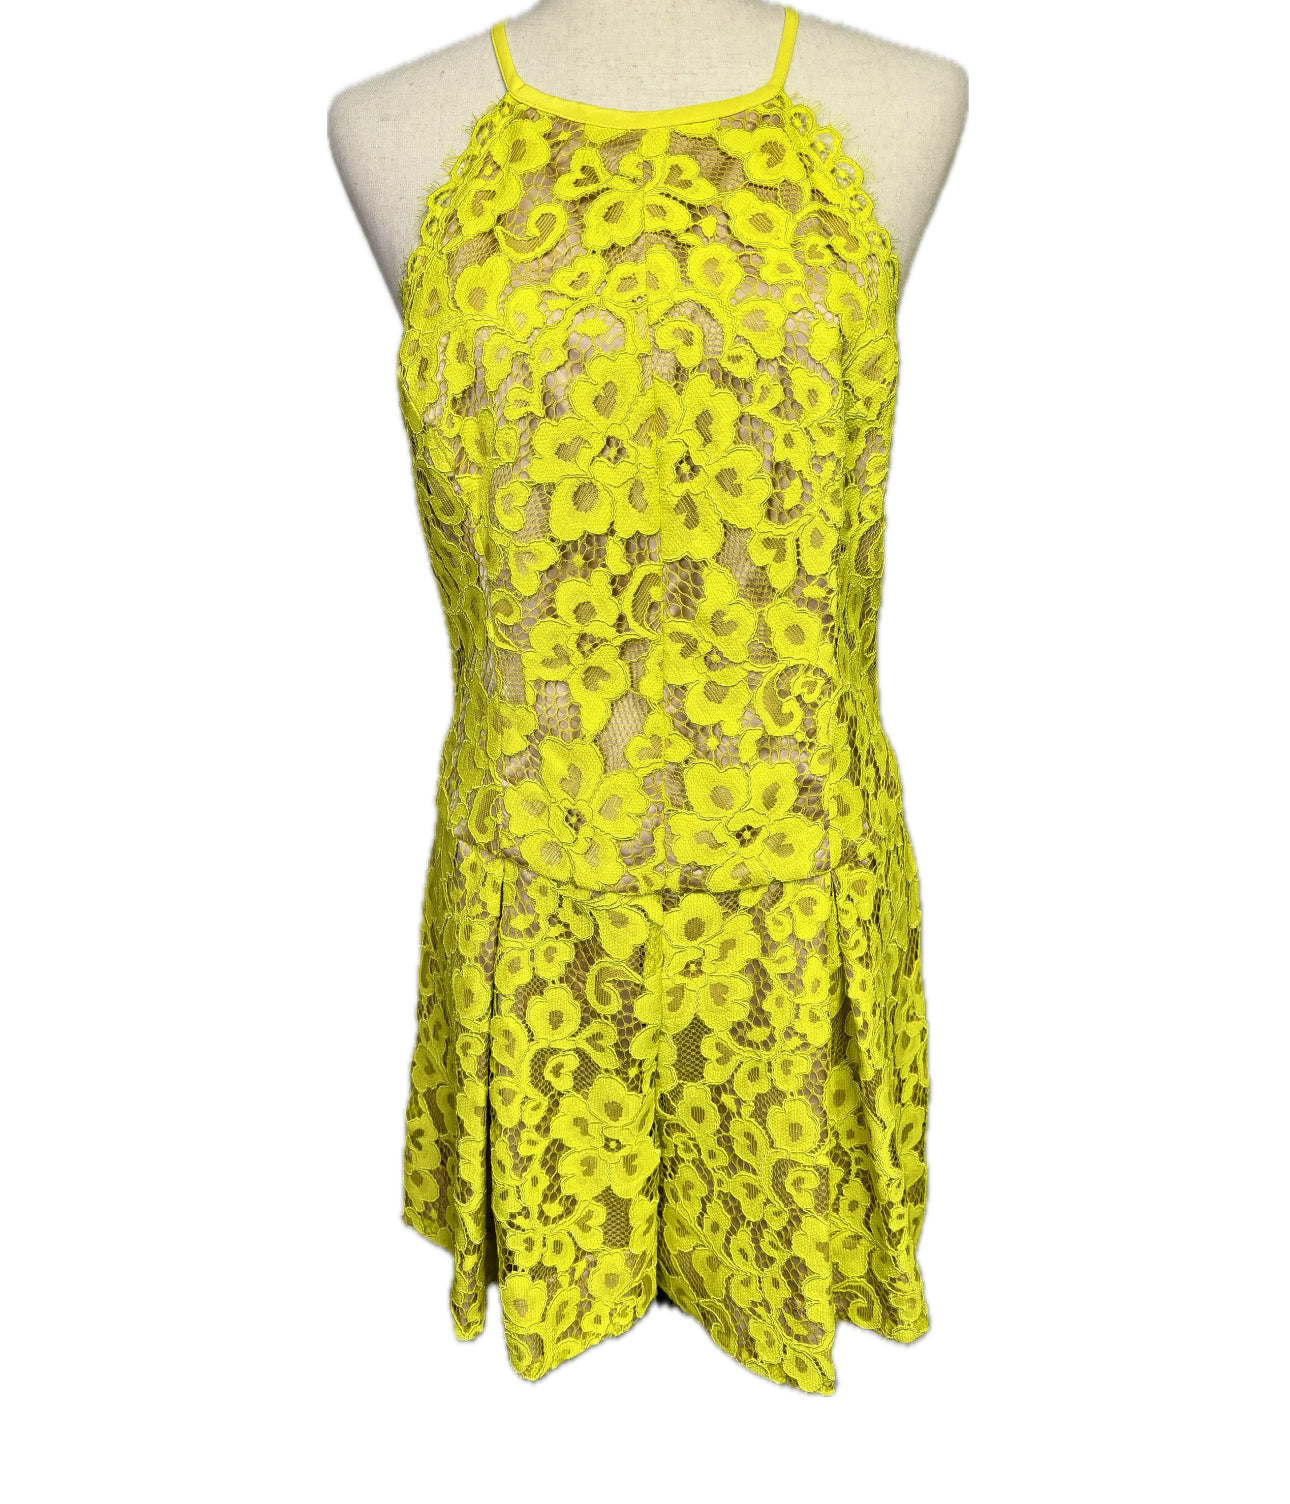 Women Size 6 Trina Turk Yellow Lace Polyester Romper/Jumpsuit